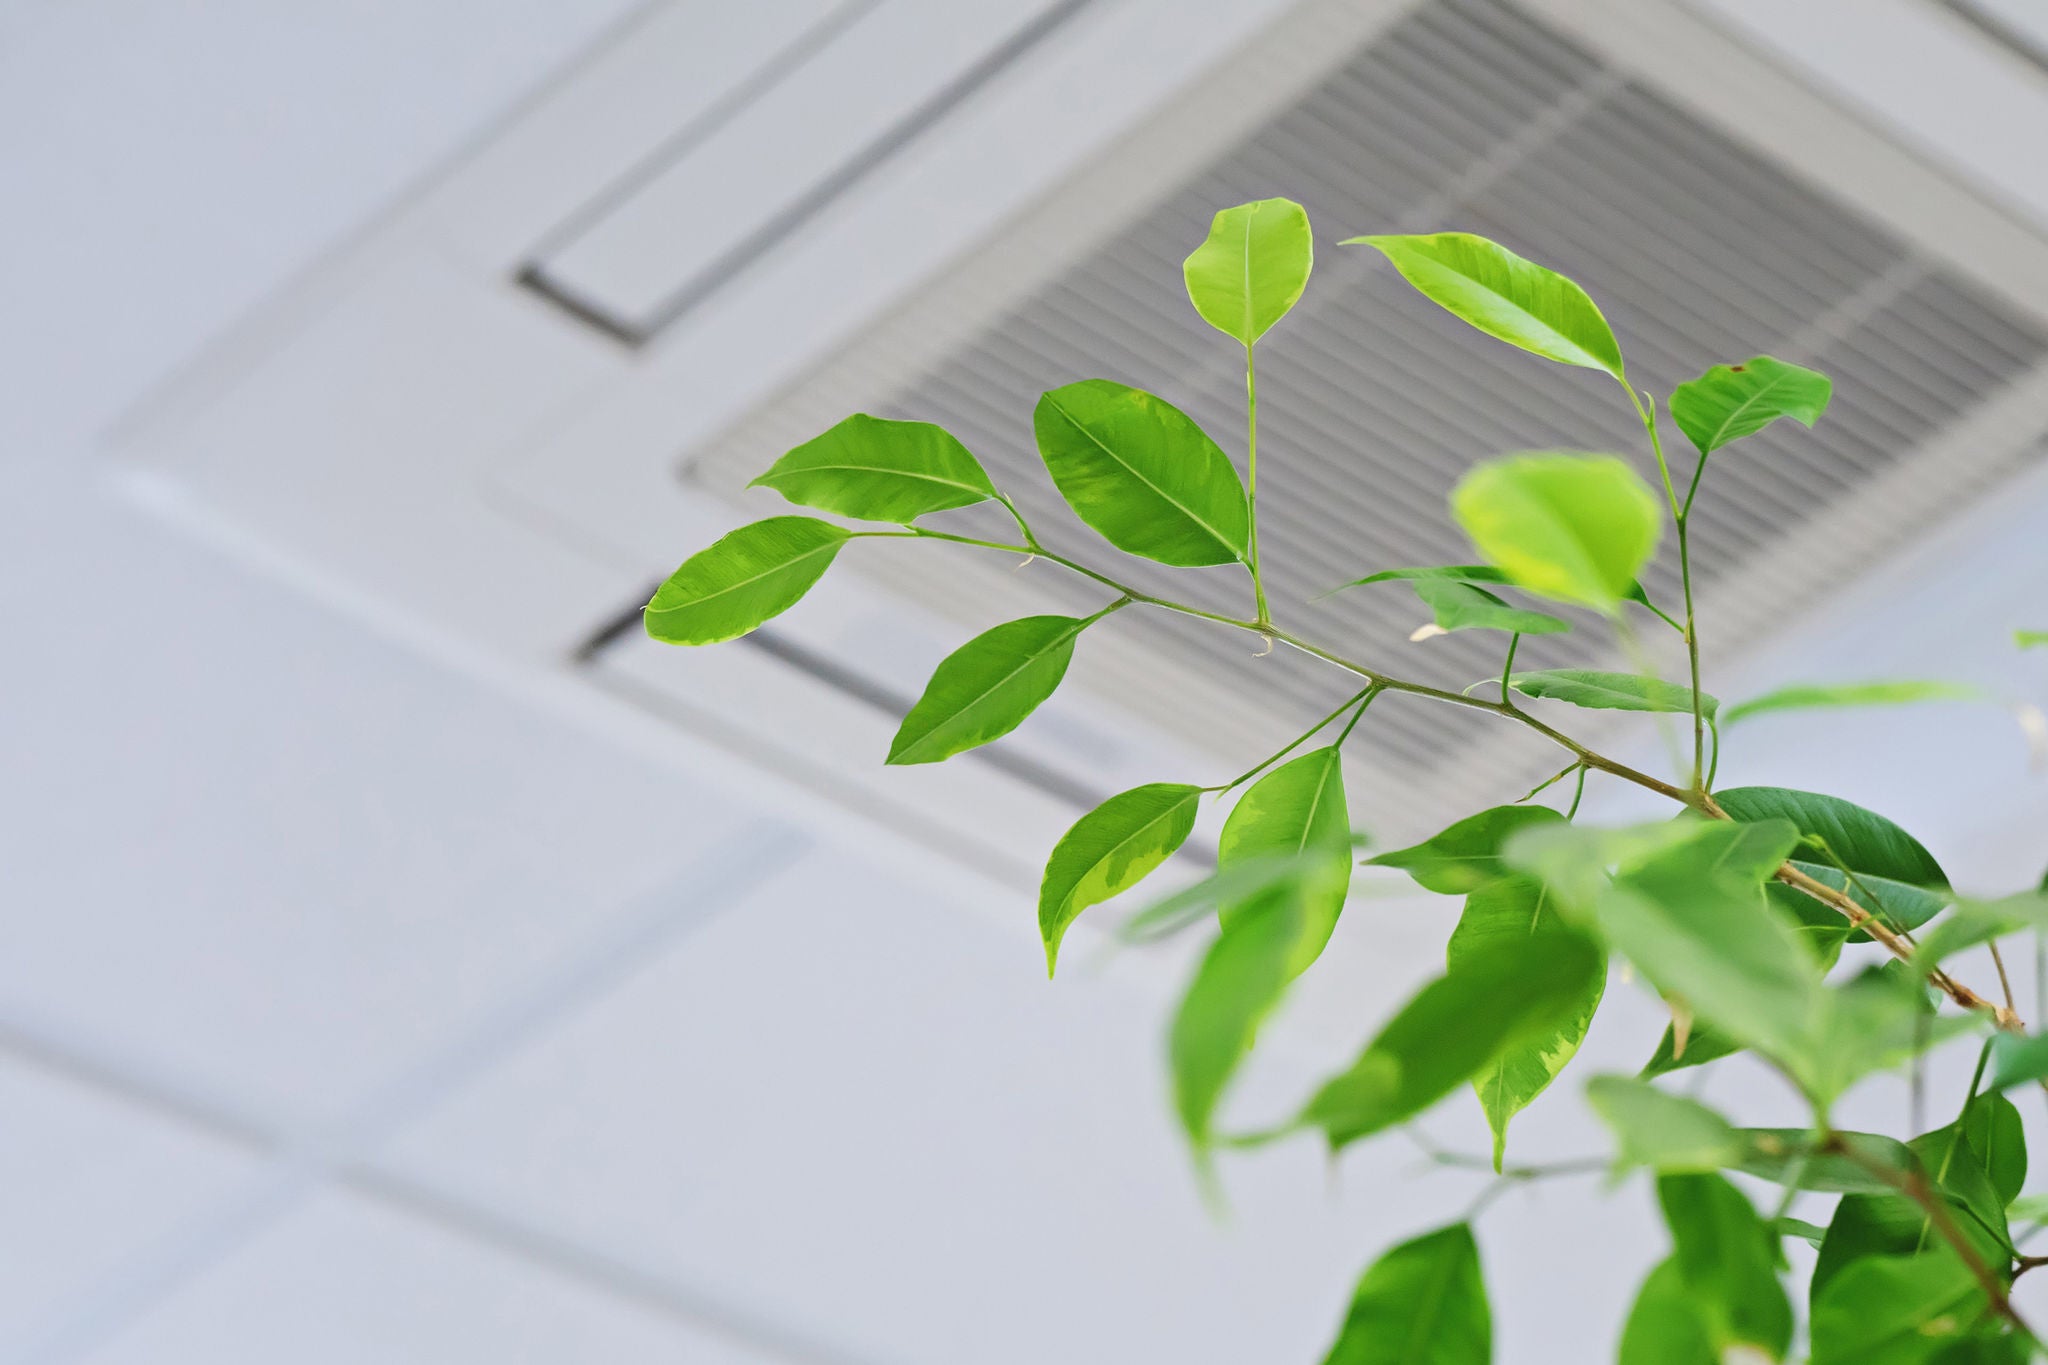 Ficus green leaves on the background ofceiling air conditioner in modenr office or at home. Indoor air quality concept